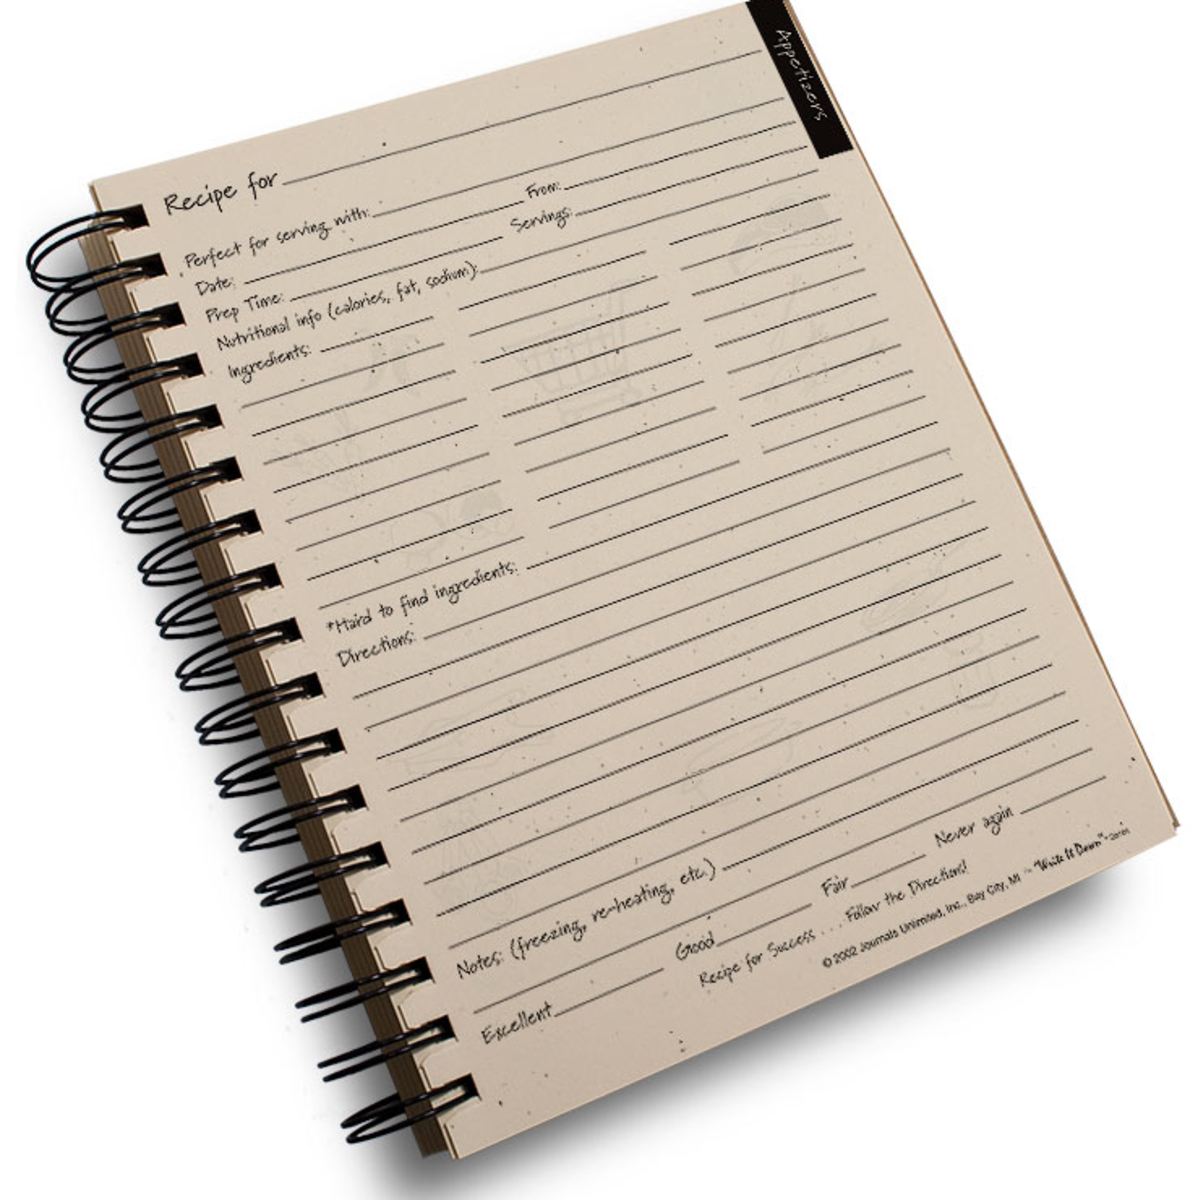 A personalized journal can make taking notes enjoyable and help kids retain cooking lessons.